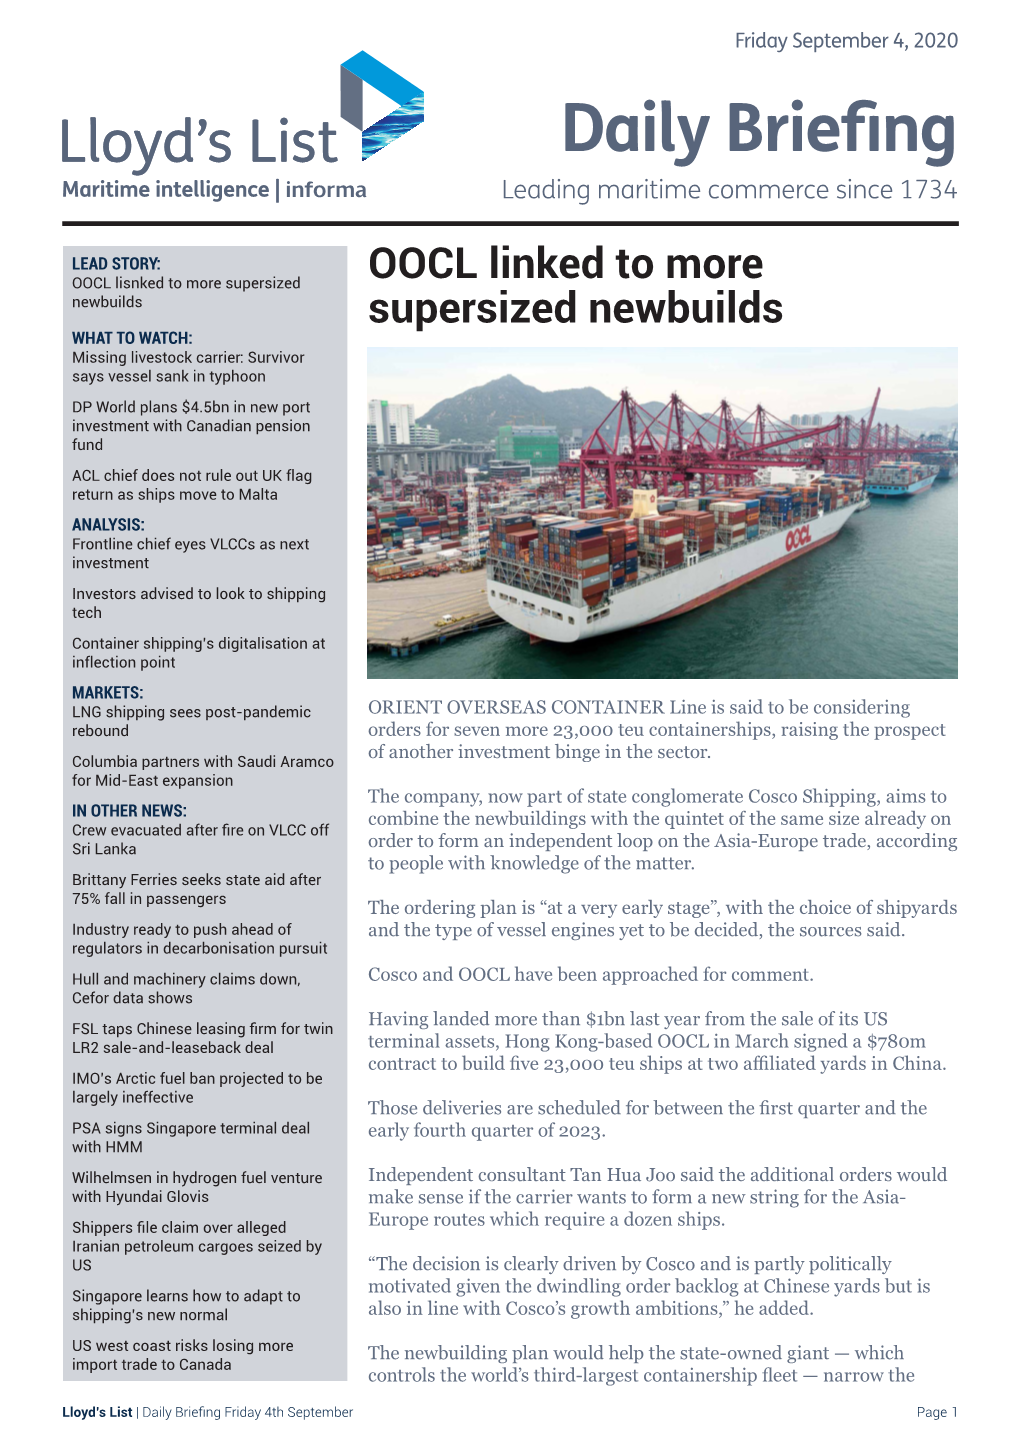 Container Shipping's Digitalisation at Inflection Point